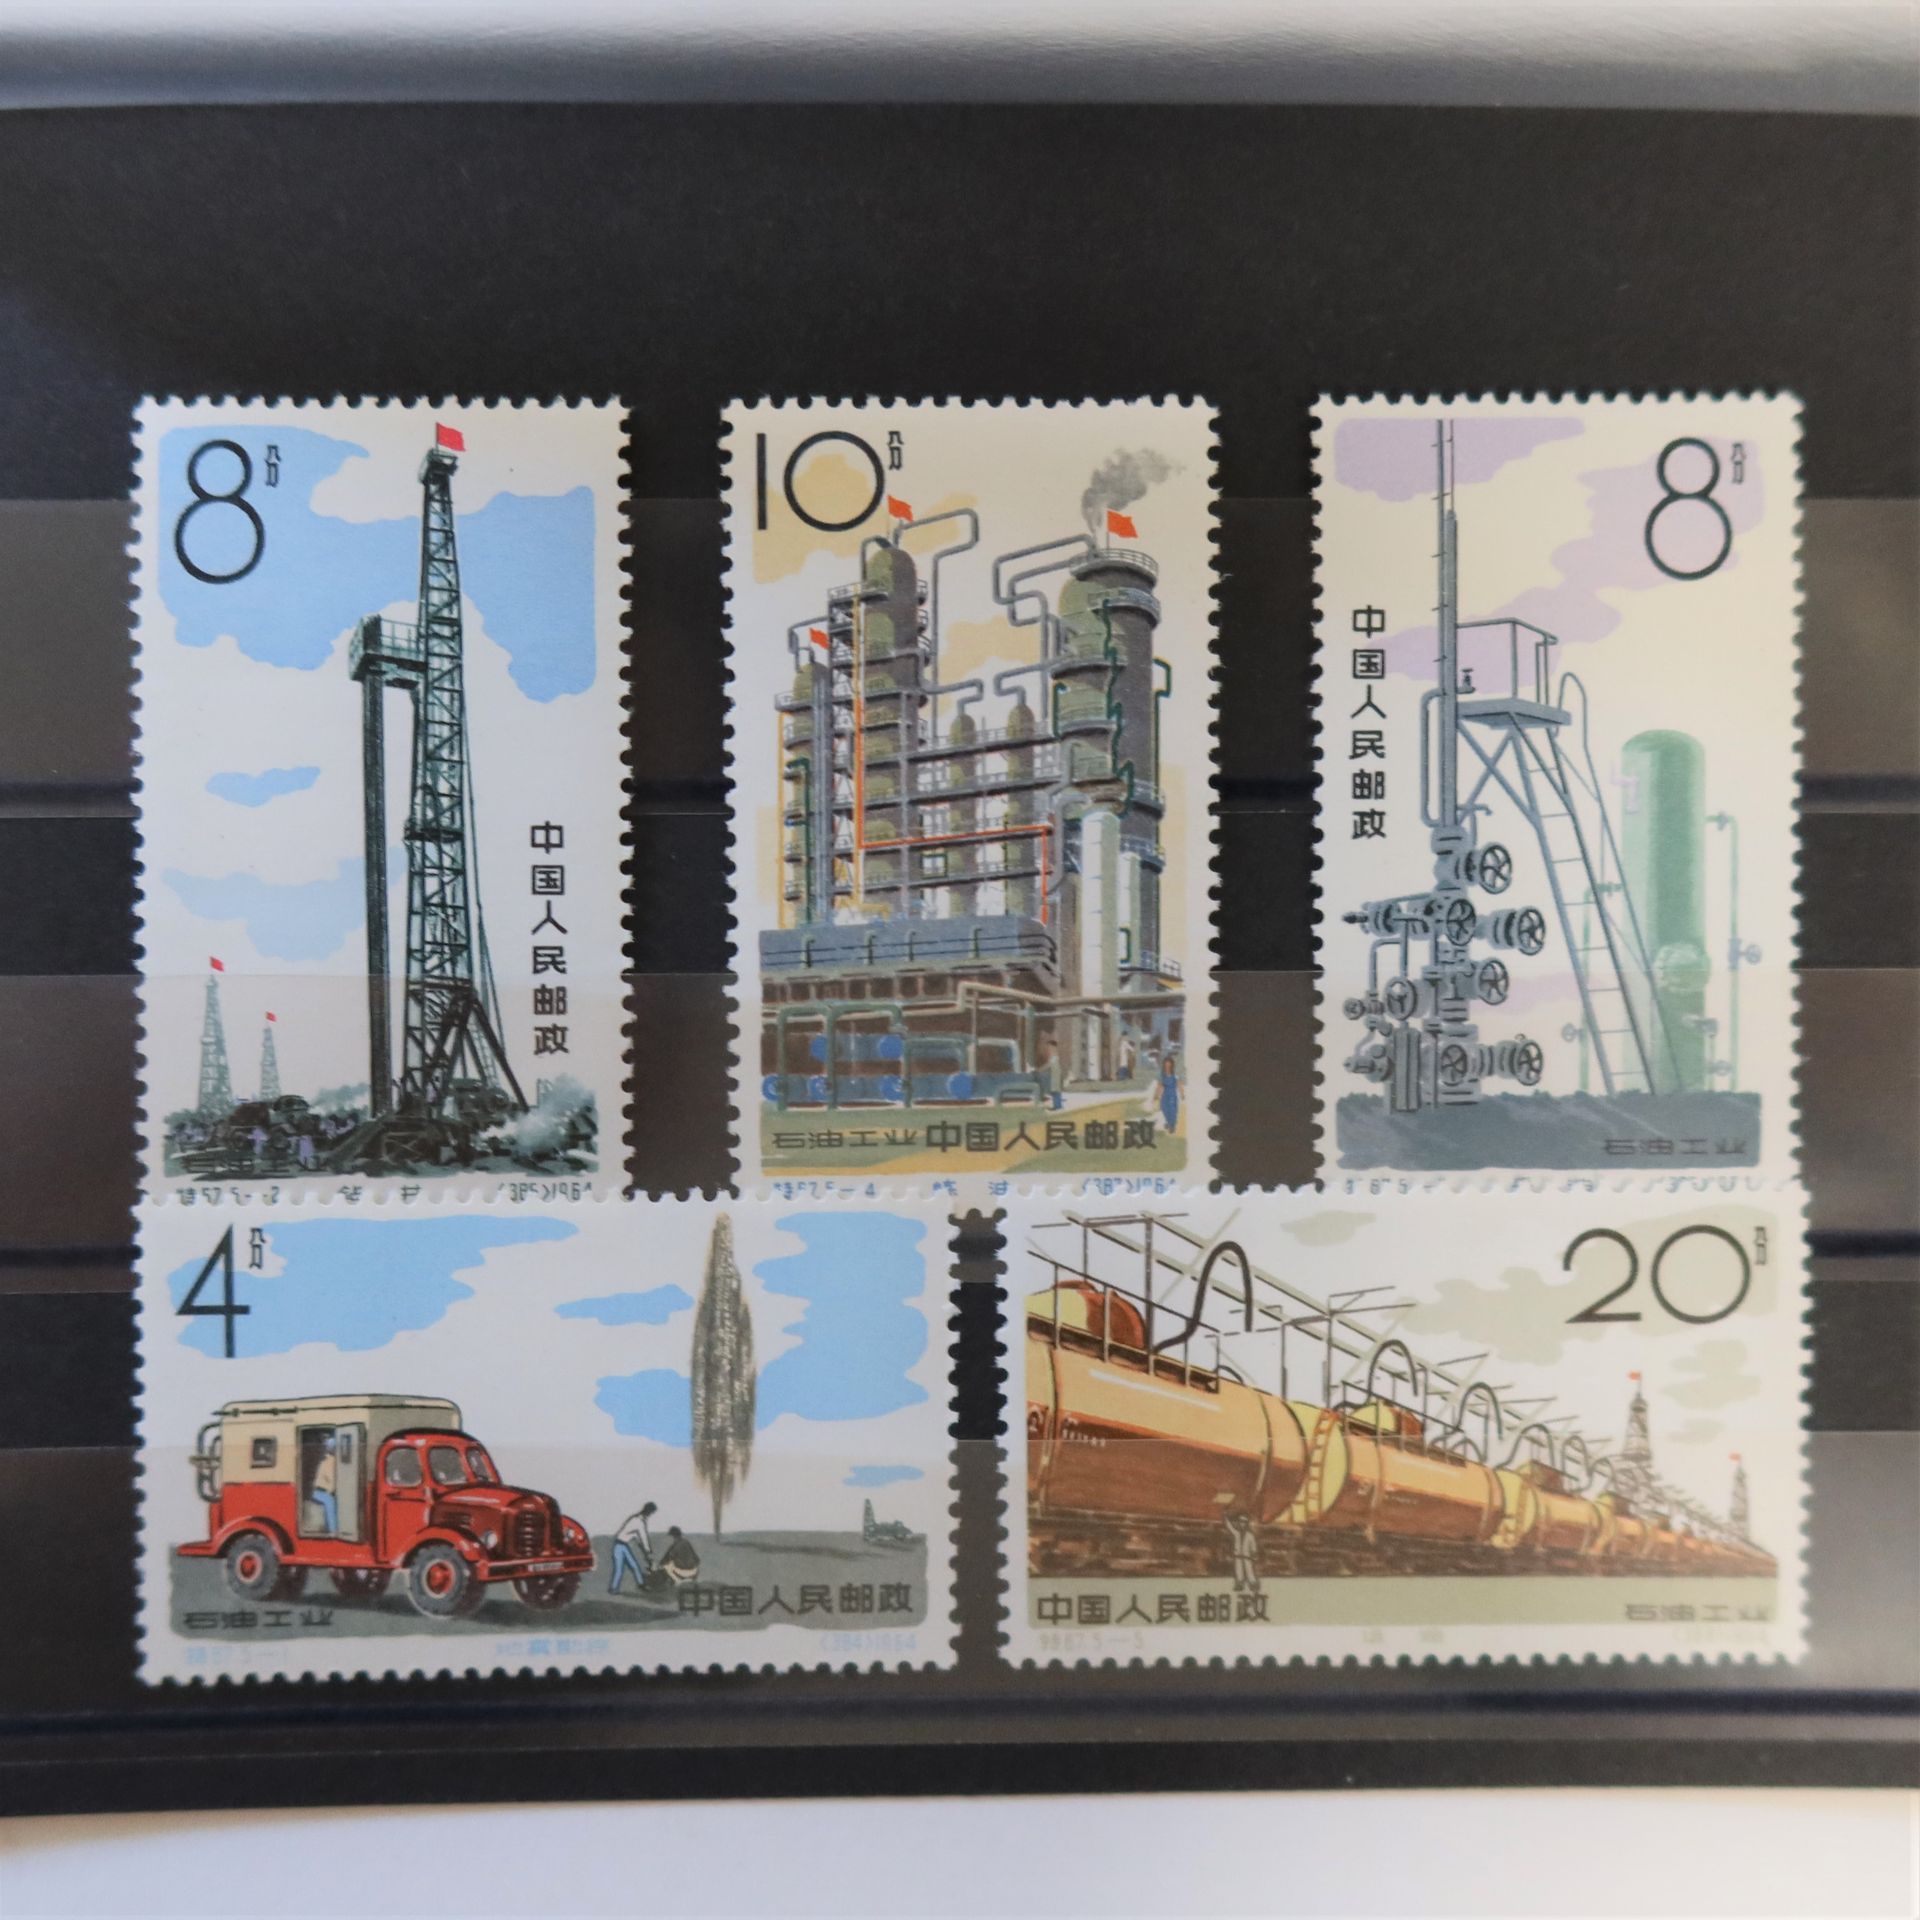 Null [CHINA]
Superb complete set n°1583 to 1587 "Oil industry", new, luxury.